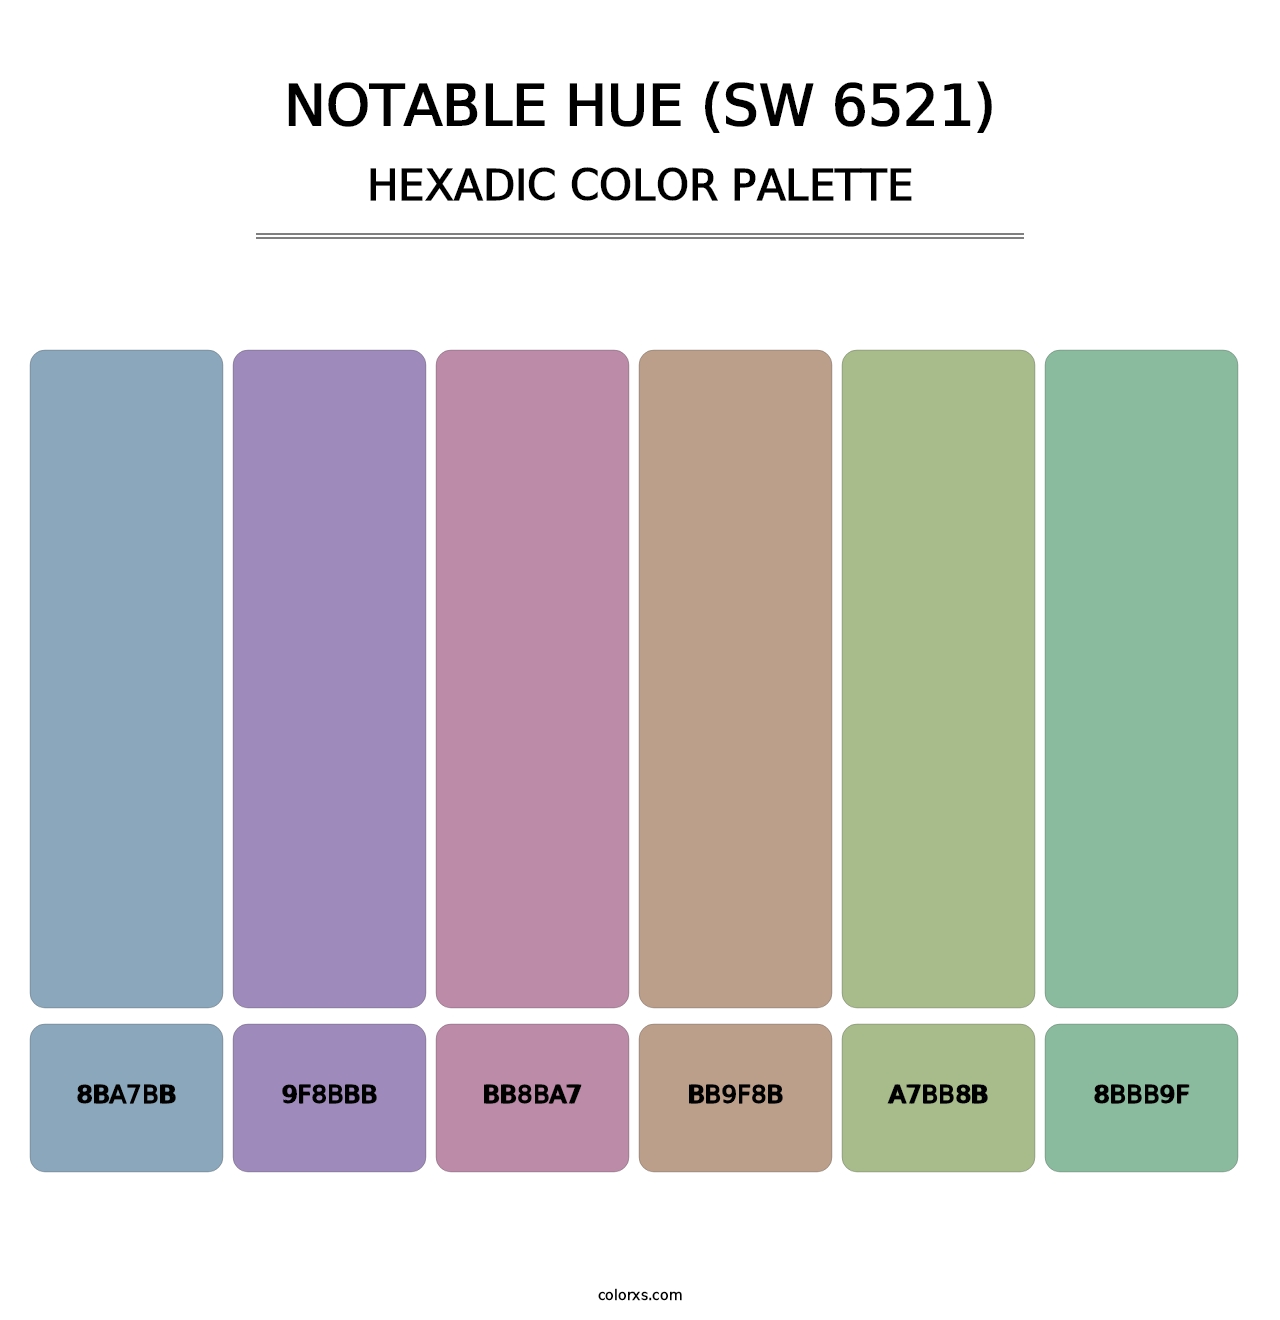 Notable Hue (SW 6521) - Hexadic Color Palette